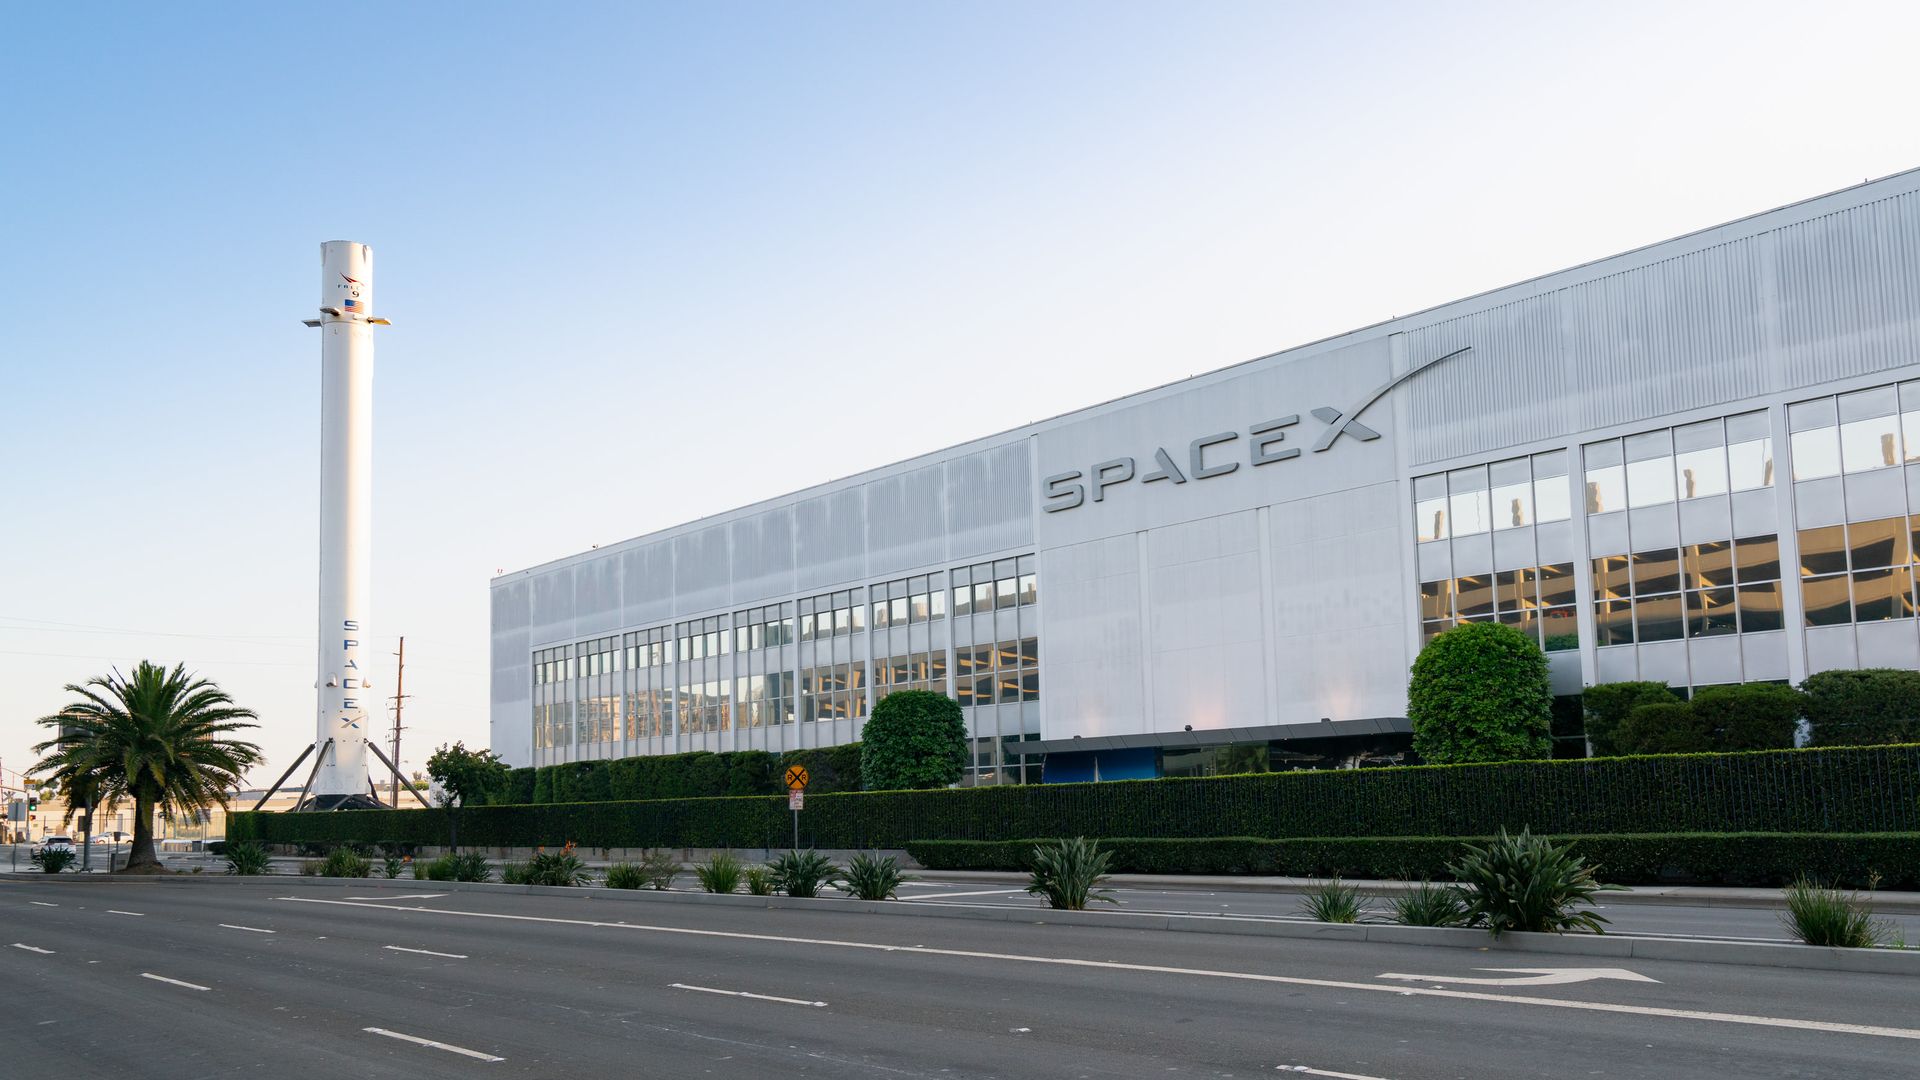 The SpaceX complex